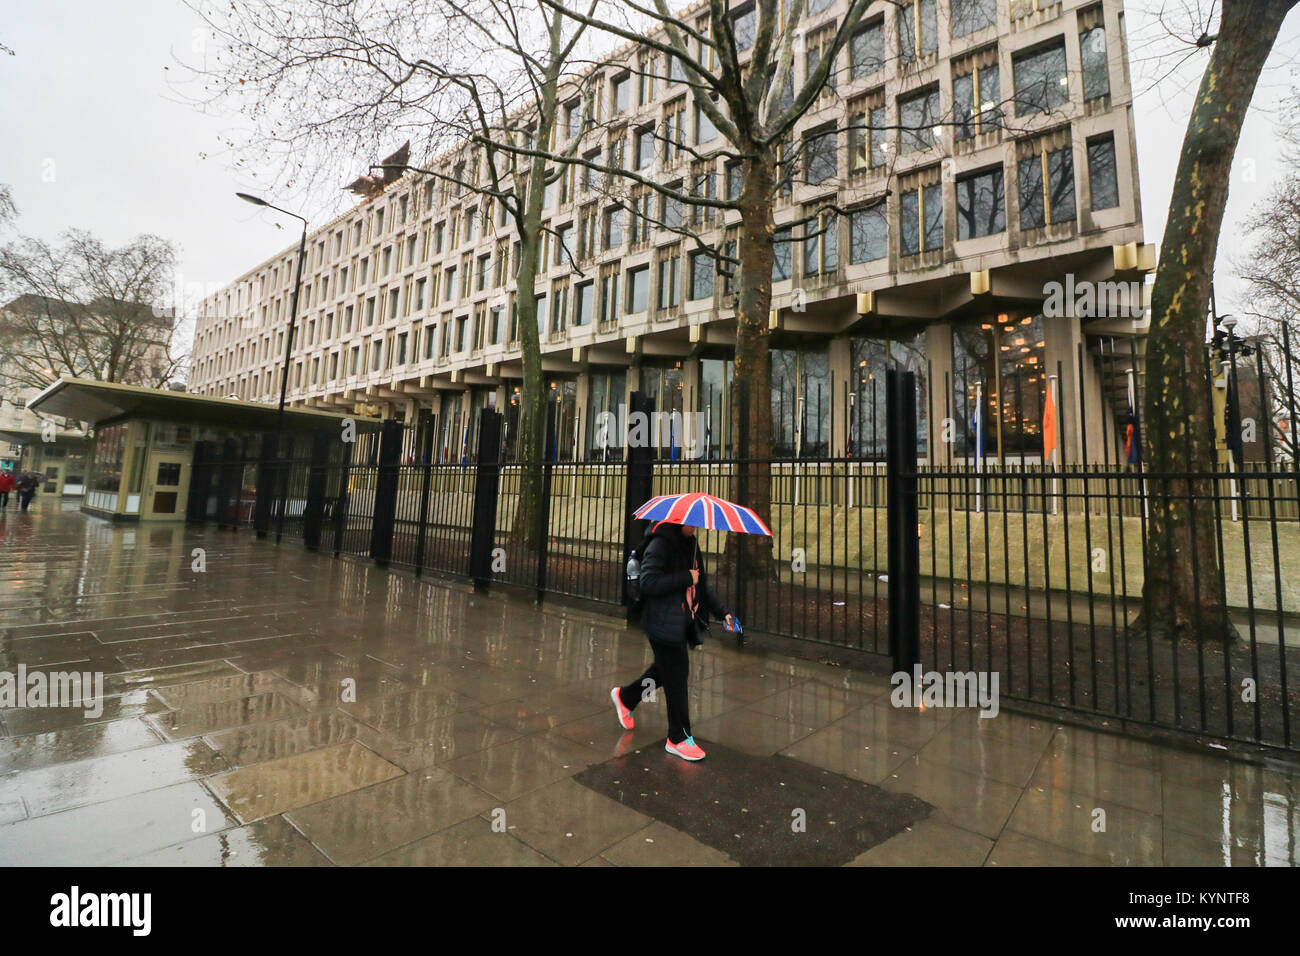 London, UK. 15th Jan, 2018. The London embassy of the United States prepares to close as it relocates to new premises in Nine Elms Vauxhall. The American Diplomatic mission has been based in Grosvenor Square Mayfair since 1960 and designed by Finnish American architect Eero Saarinen  Credit: amer ghazzal/Alamy Live News Stock Photo